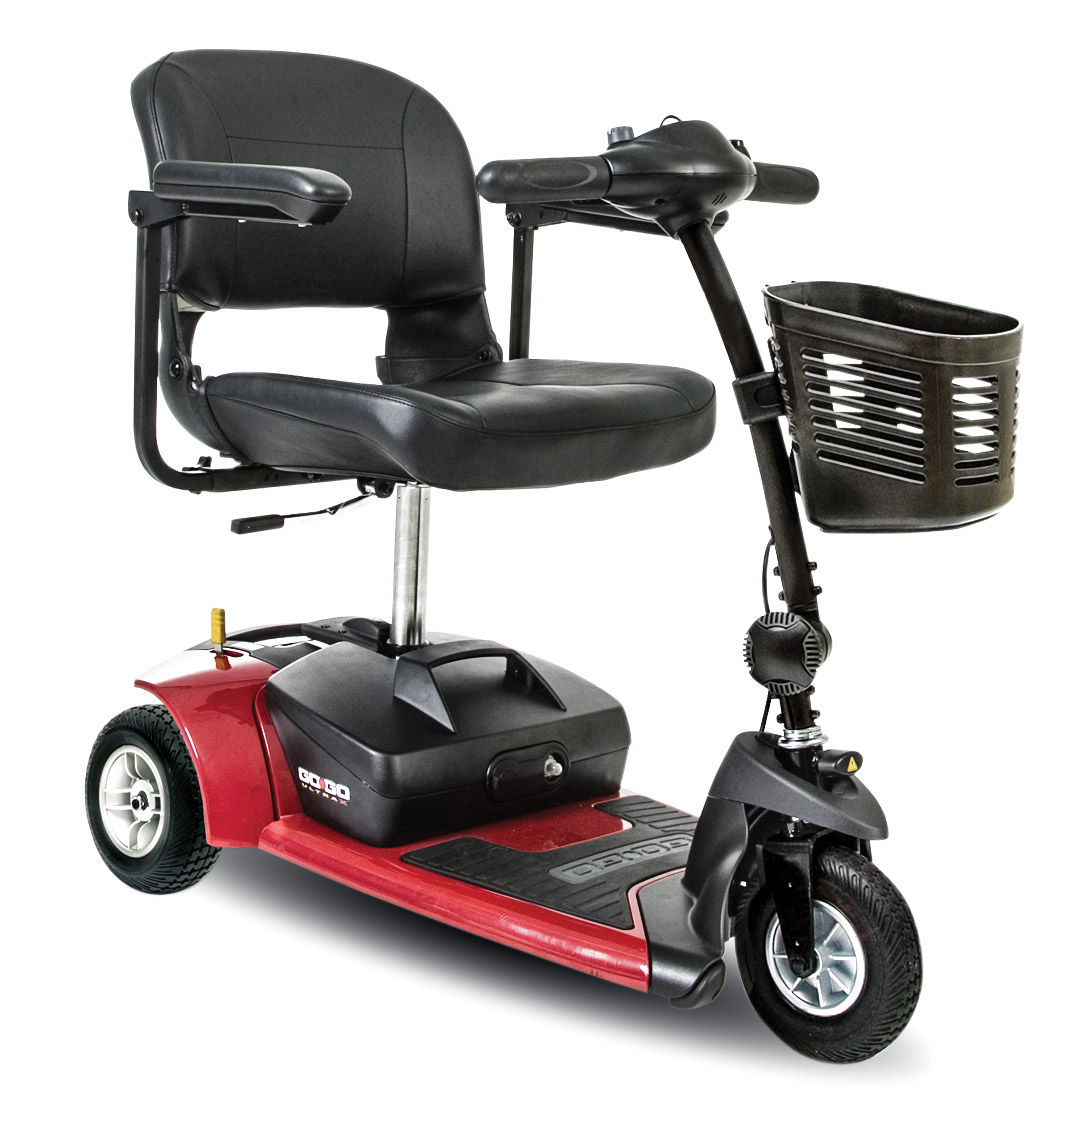 Busk snave Tigge Go-Go® Ultra X Mobility Scooter - 3 Wheel - Martin Mobility - Scooters,  Lift Chairs, Stair Lifts